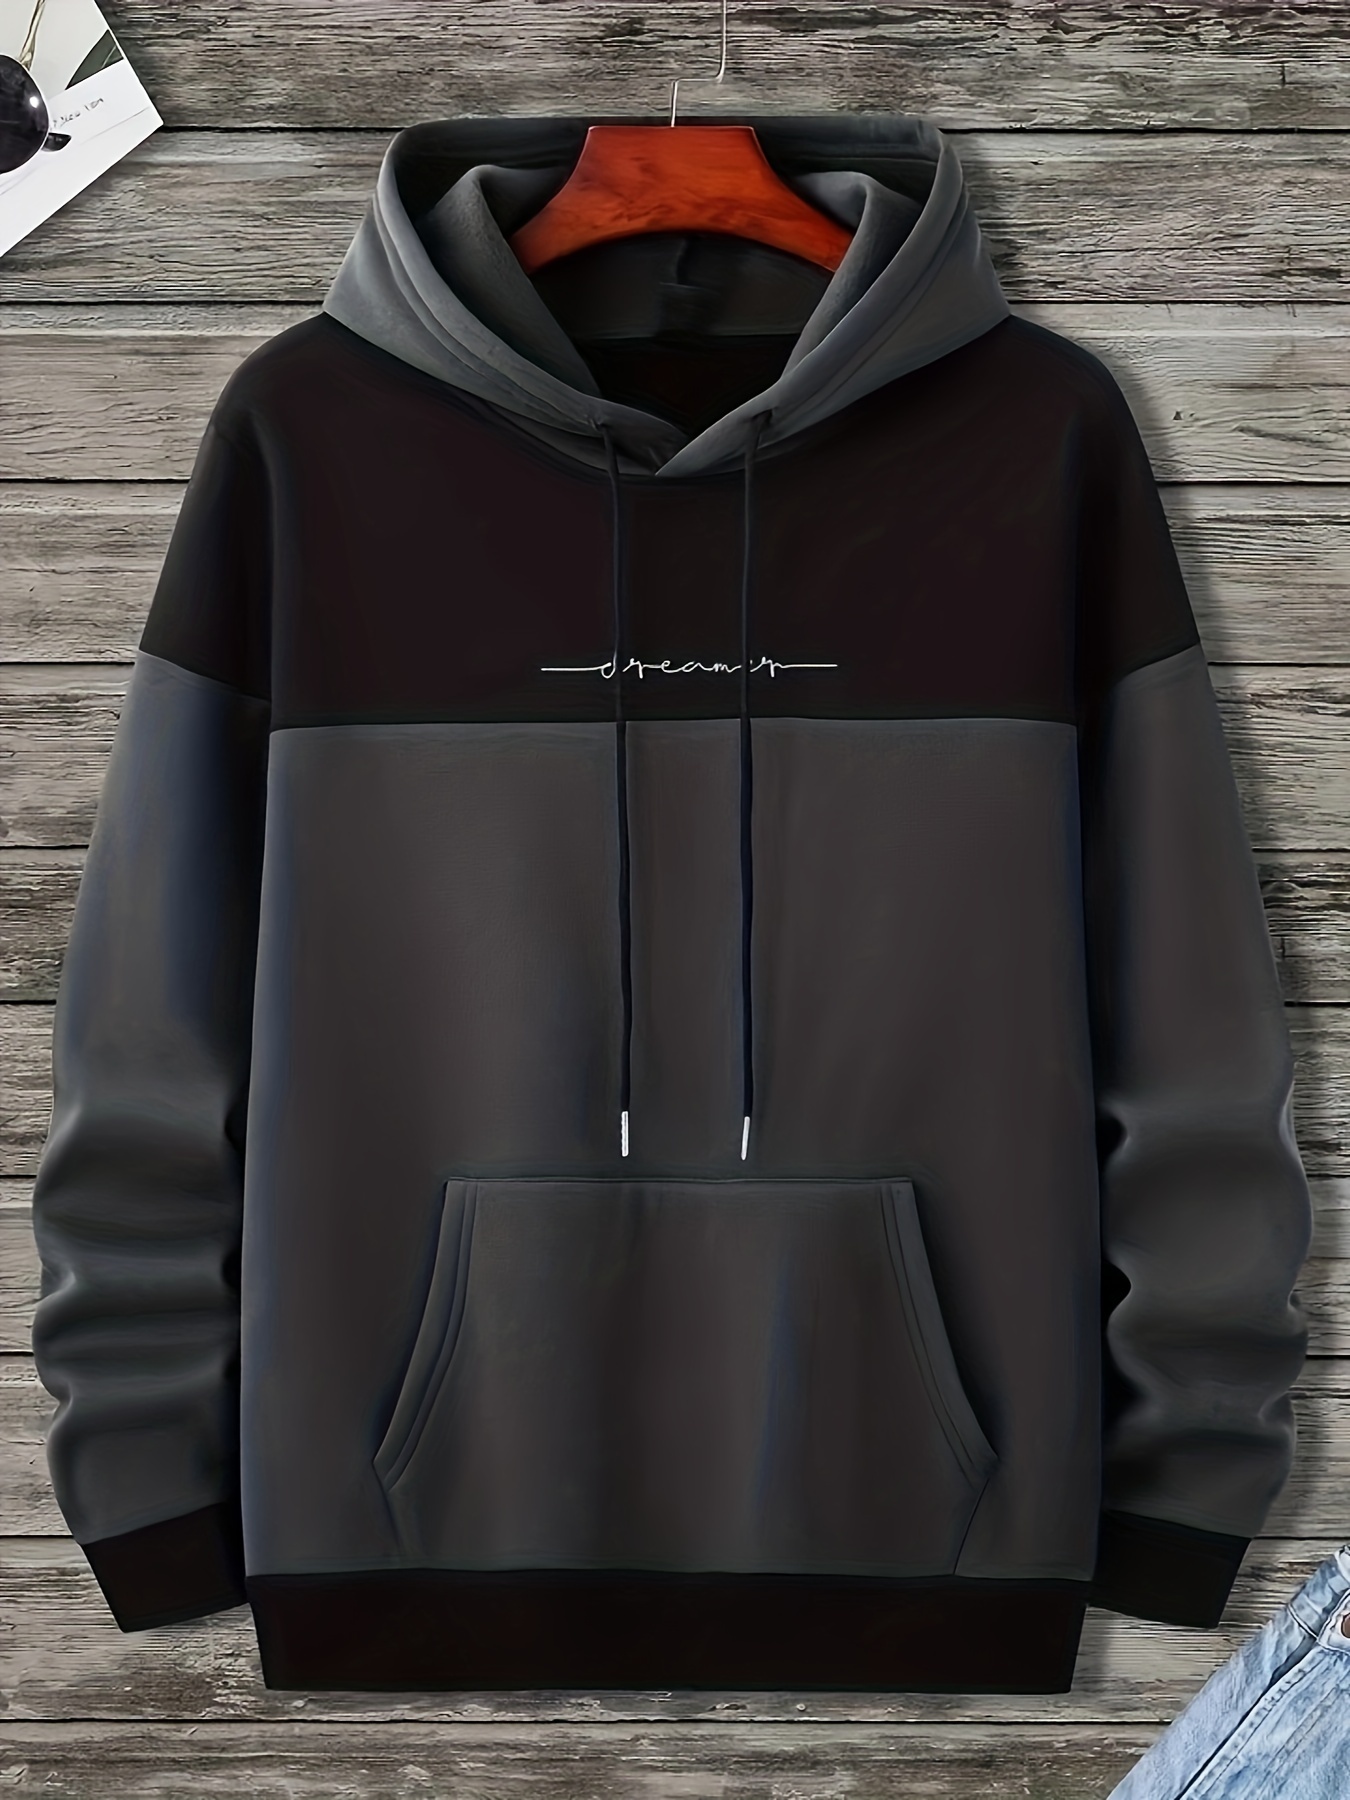 Fishing & Hunting Letter Print, Hoodies For Men, Graphic Sweatshirt With Kangaroo Pocket, Comfy Trendy Hooded Pullover, Mens Clothing For Fall